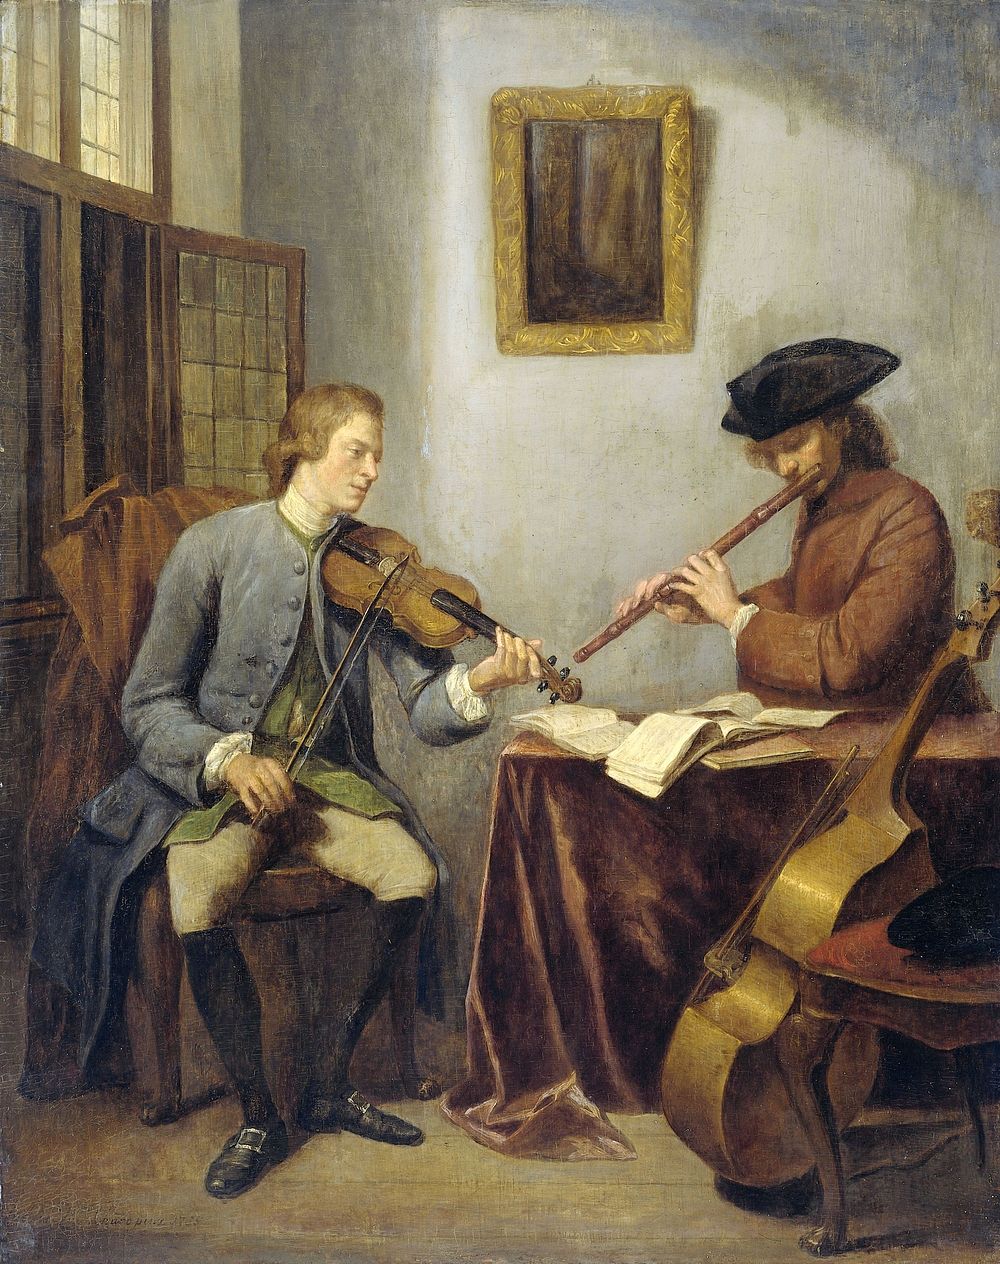 A Violinist and a Flutist Playing Music together (The Musicians) (1755) by Julius Henricus Quinkhard